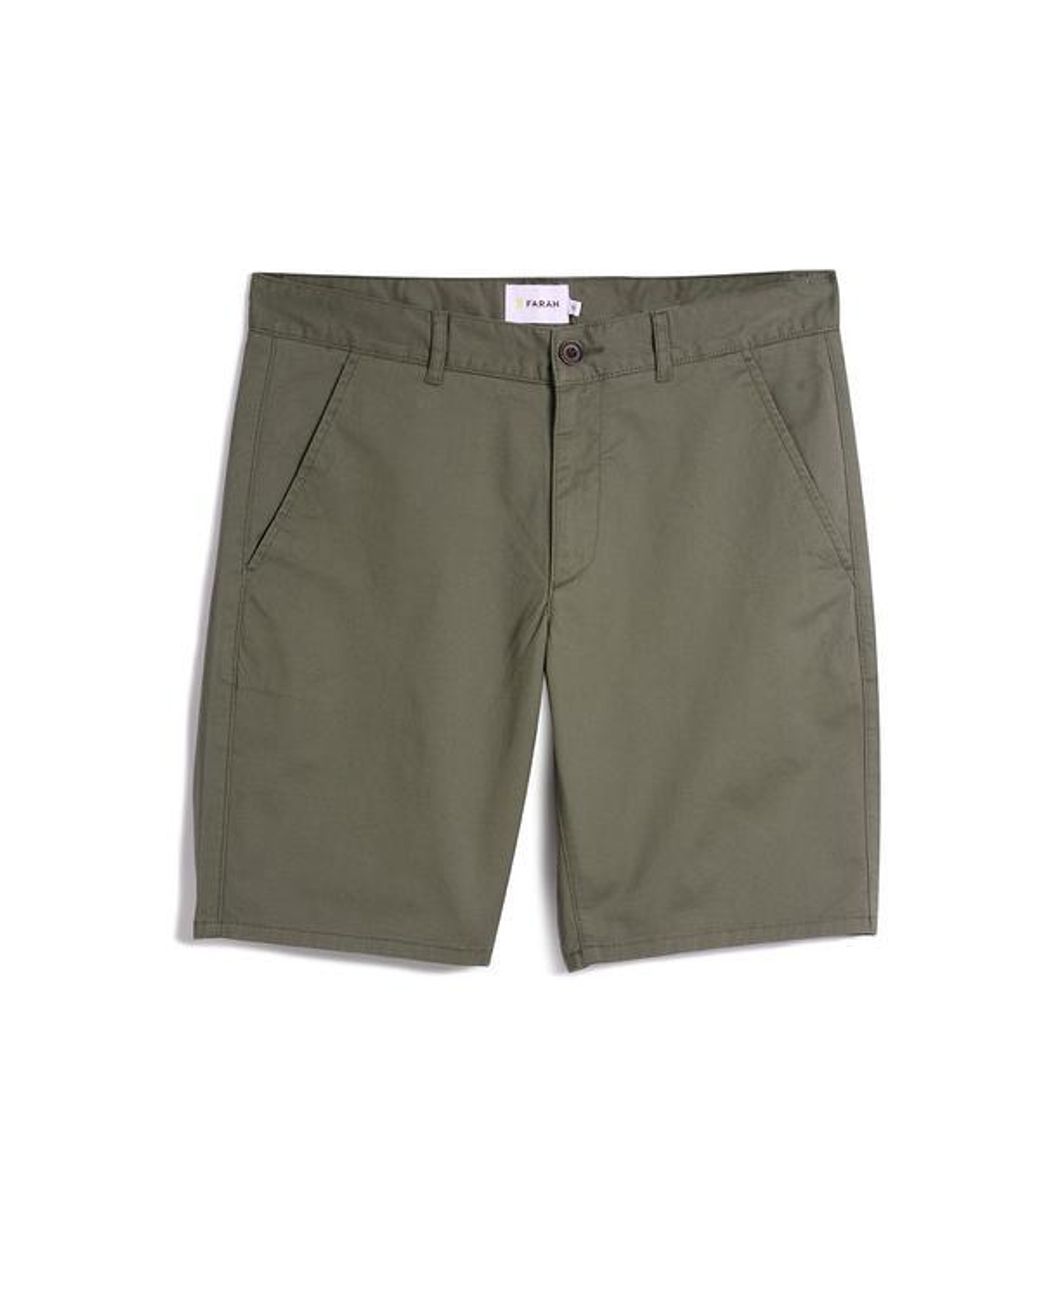 Farah Cotton Hawk Dyed Twill Chino Shorts Vintage Green for Men - Lyst